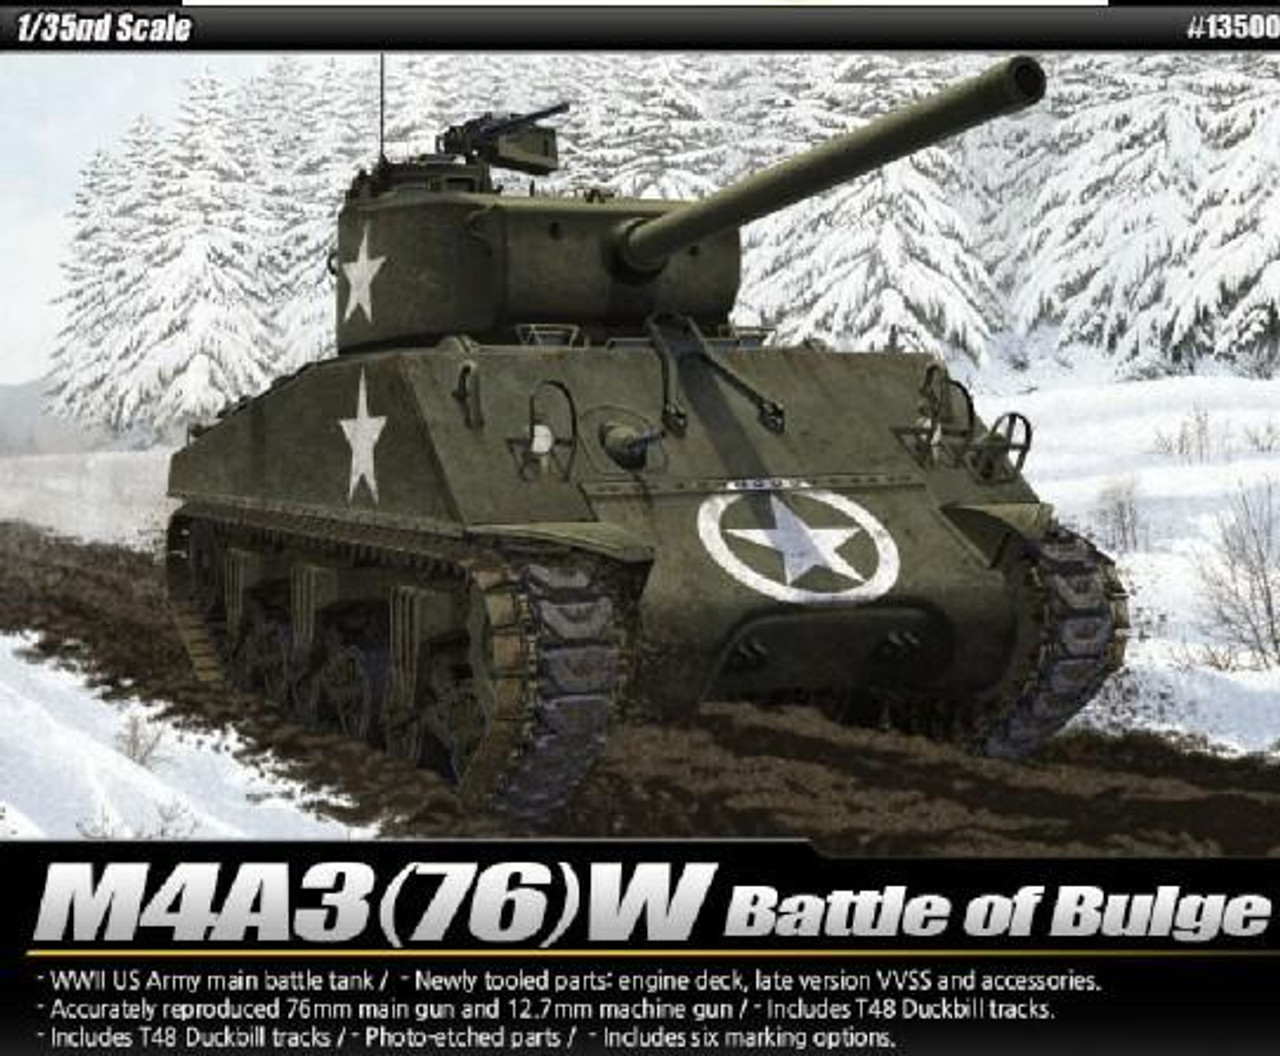 ACD13500 1/35 Academy M4A376W US Battle of Bulge Tank MMD Squadron